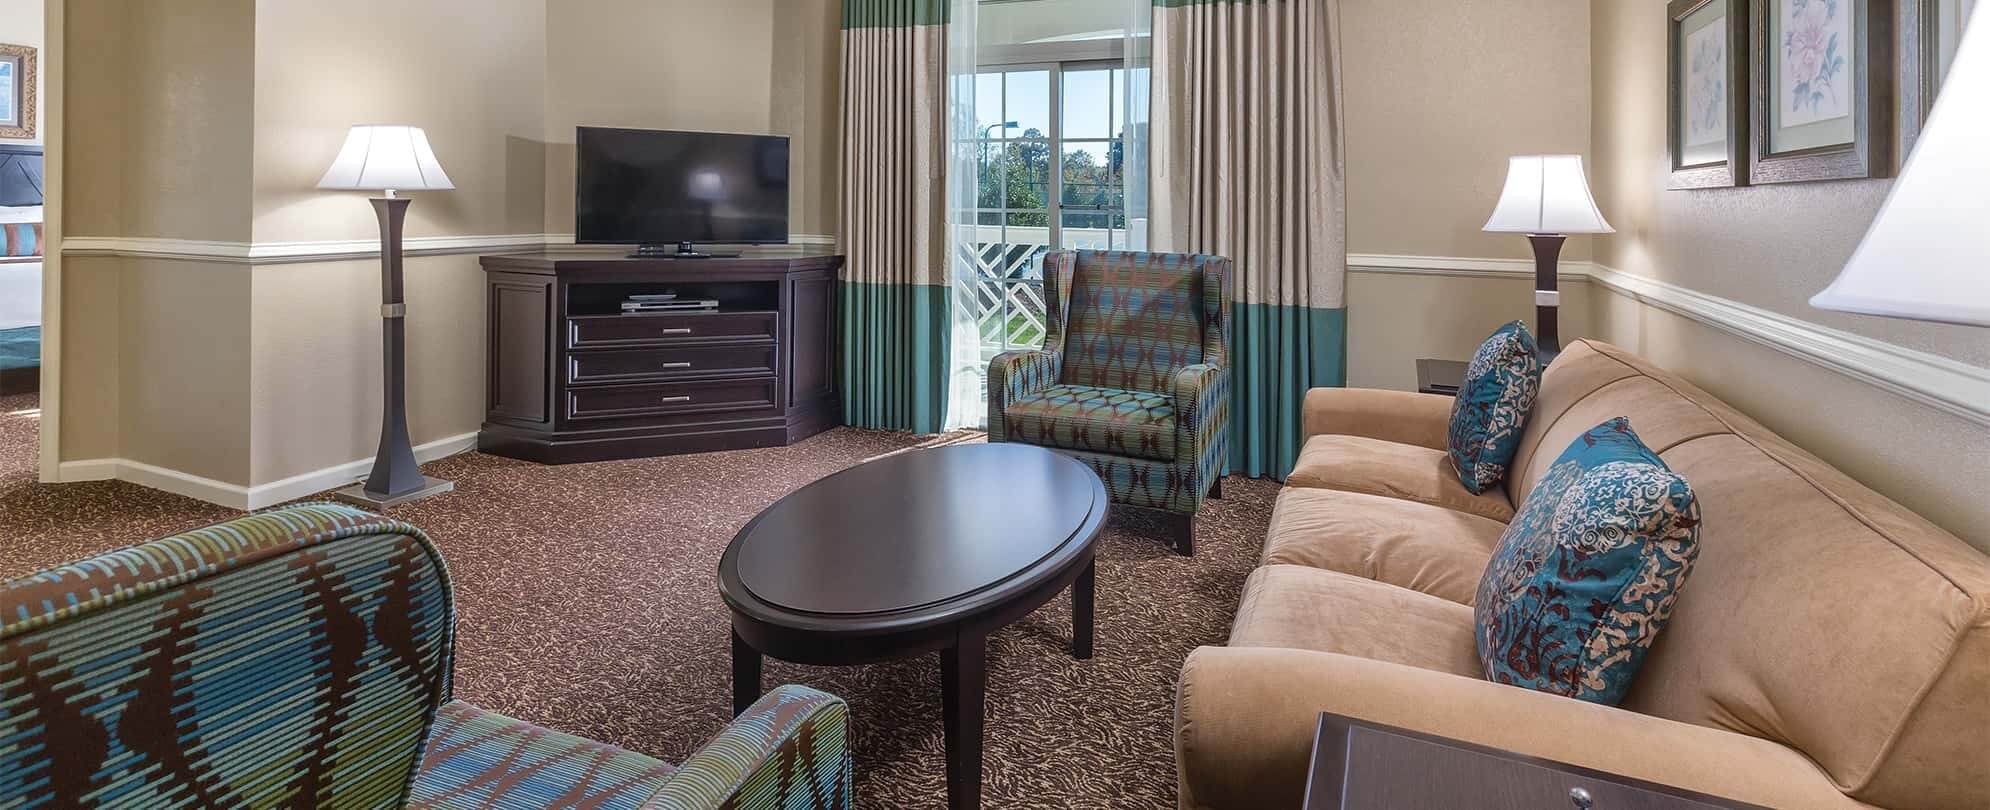 A living room furnished with couch, table, lamps and television in a Margaritaville Vacation Club suite. 